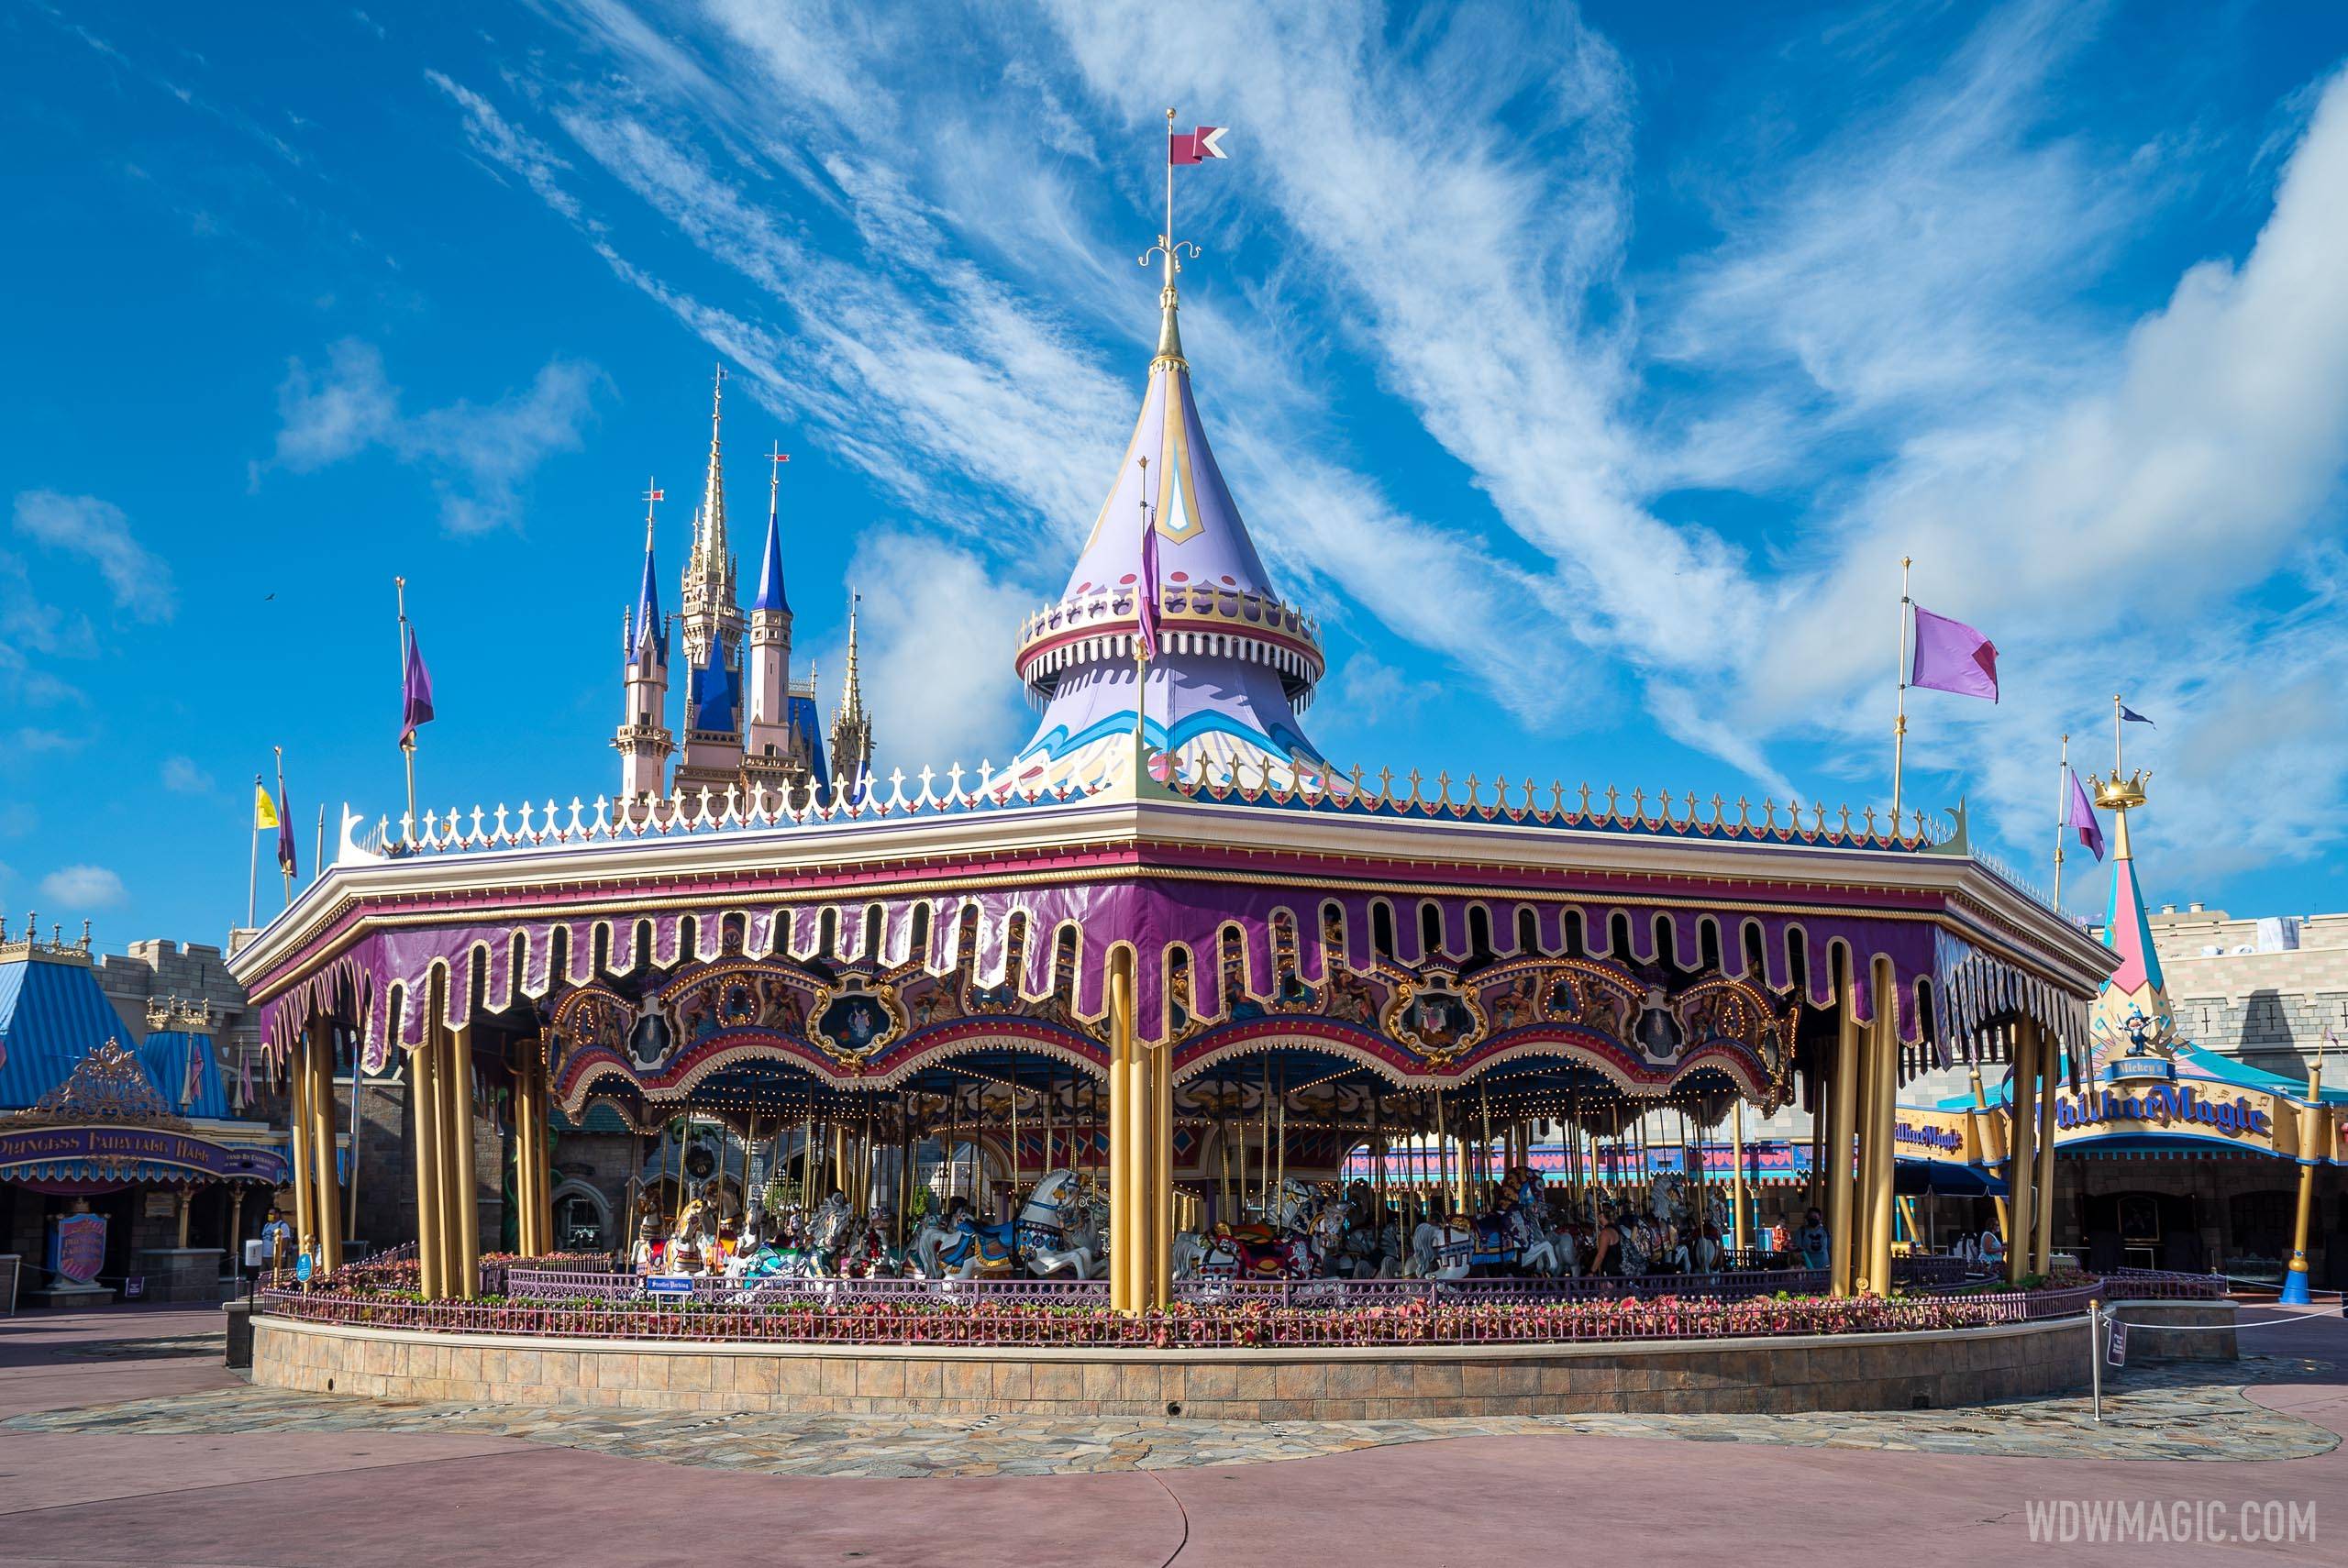 Prince Charming Regal Carrousel overview